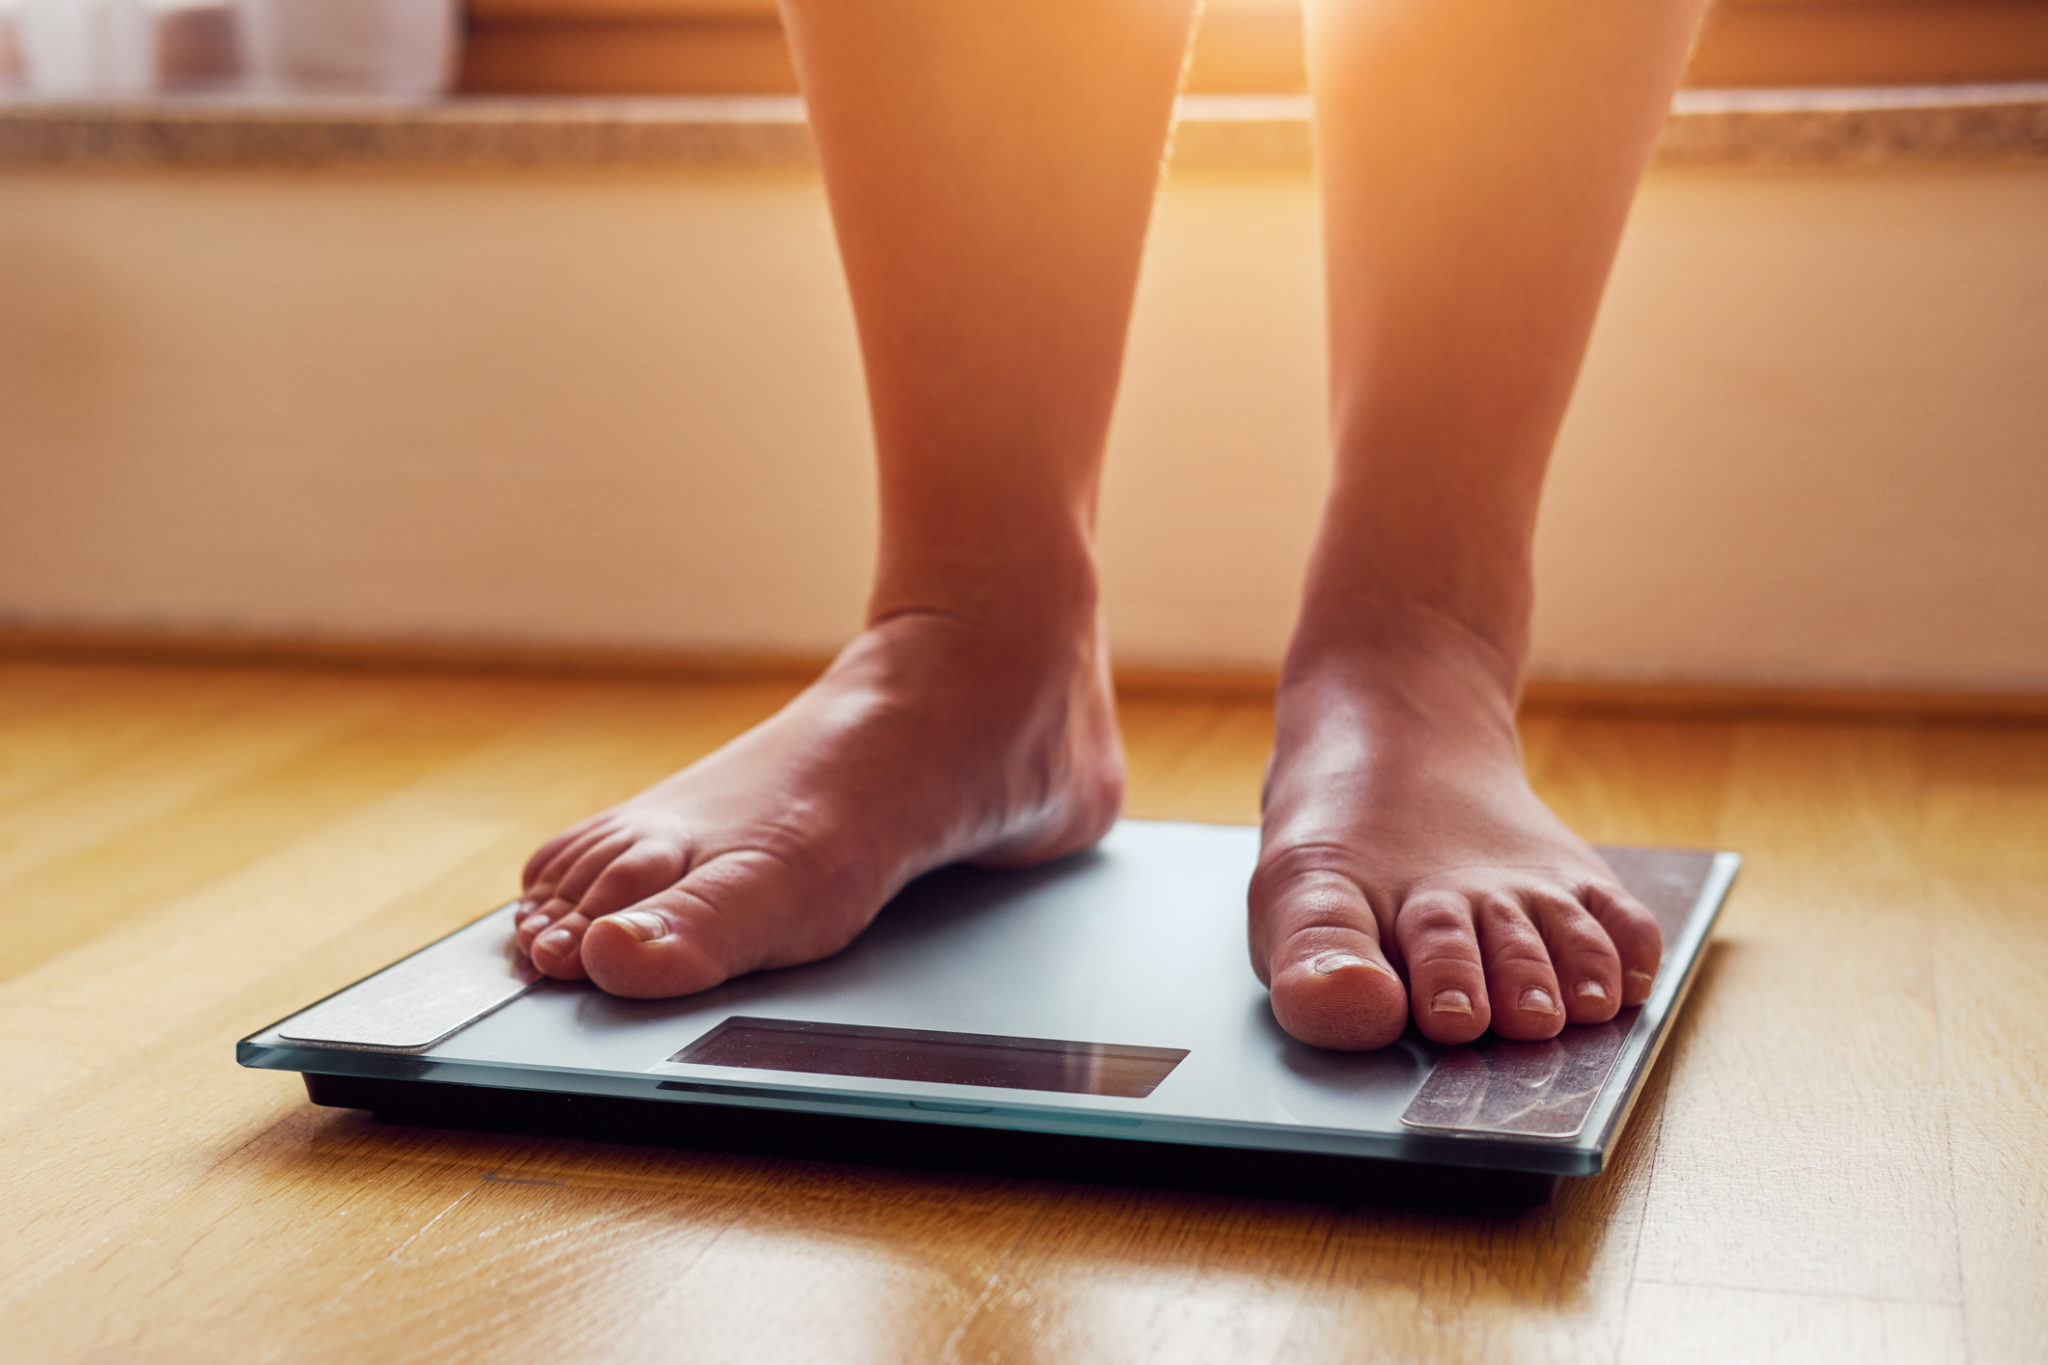 How Much Do You Have to Weigh to Get Weight Loss Surgery?